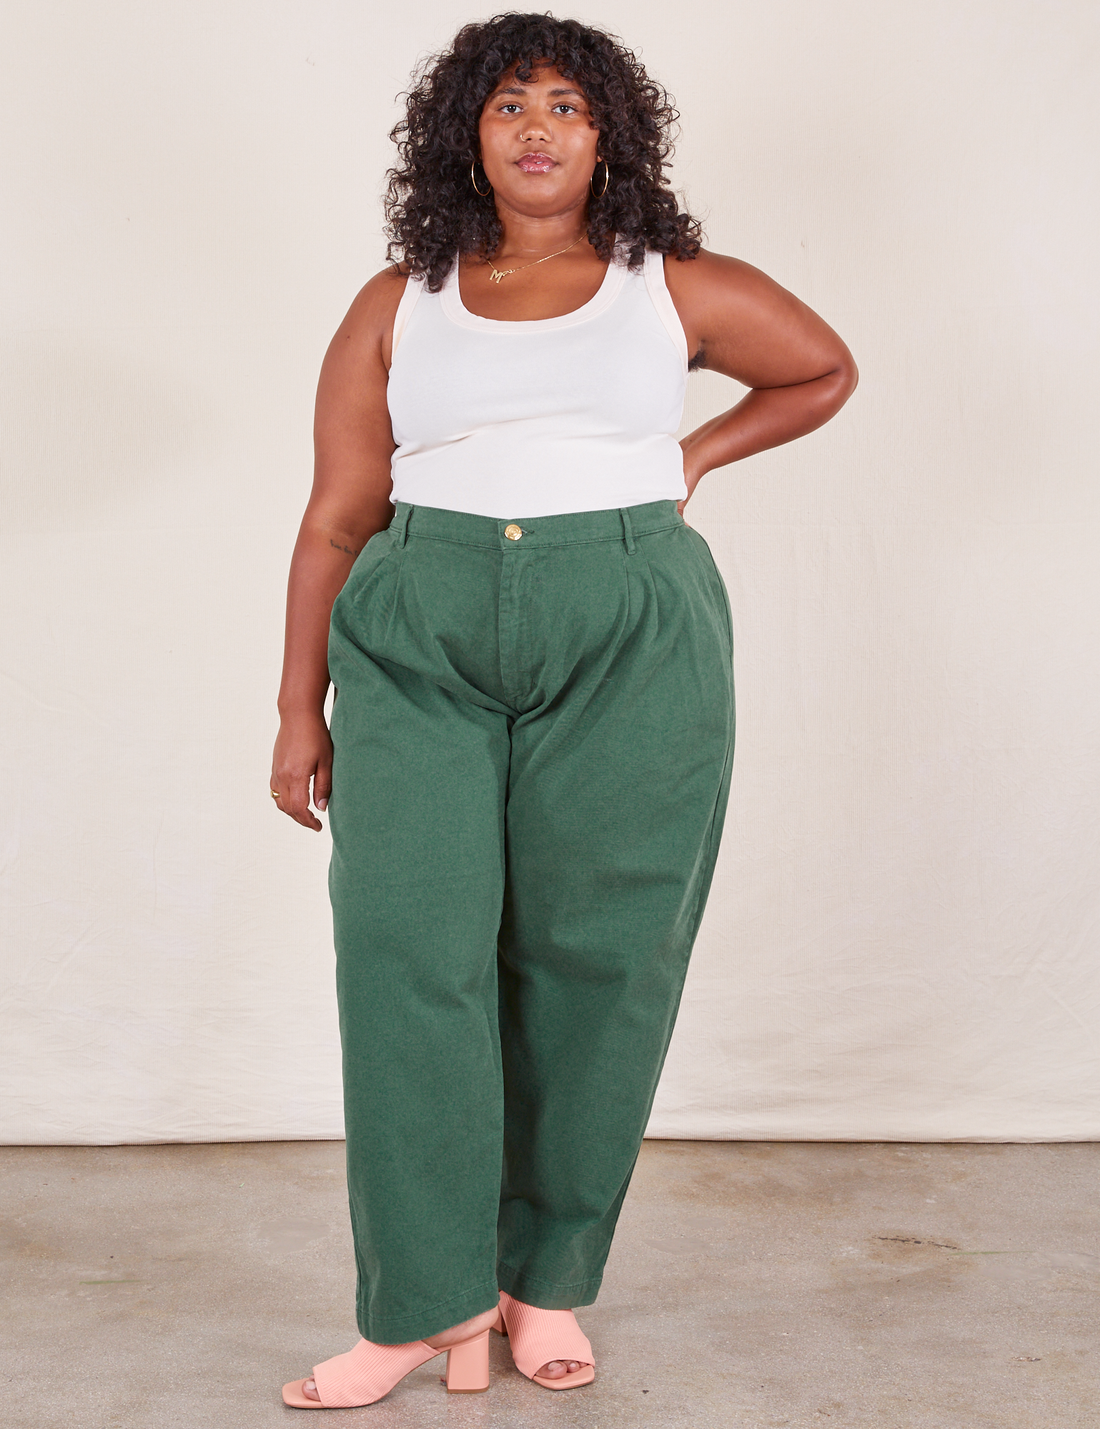 Morgan is 5'5" and wearing 1XL Heavyweight Trousers in Dark Emerald Green paired with a vintage off-white Tank Top